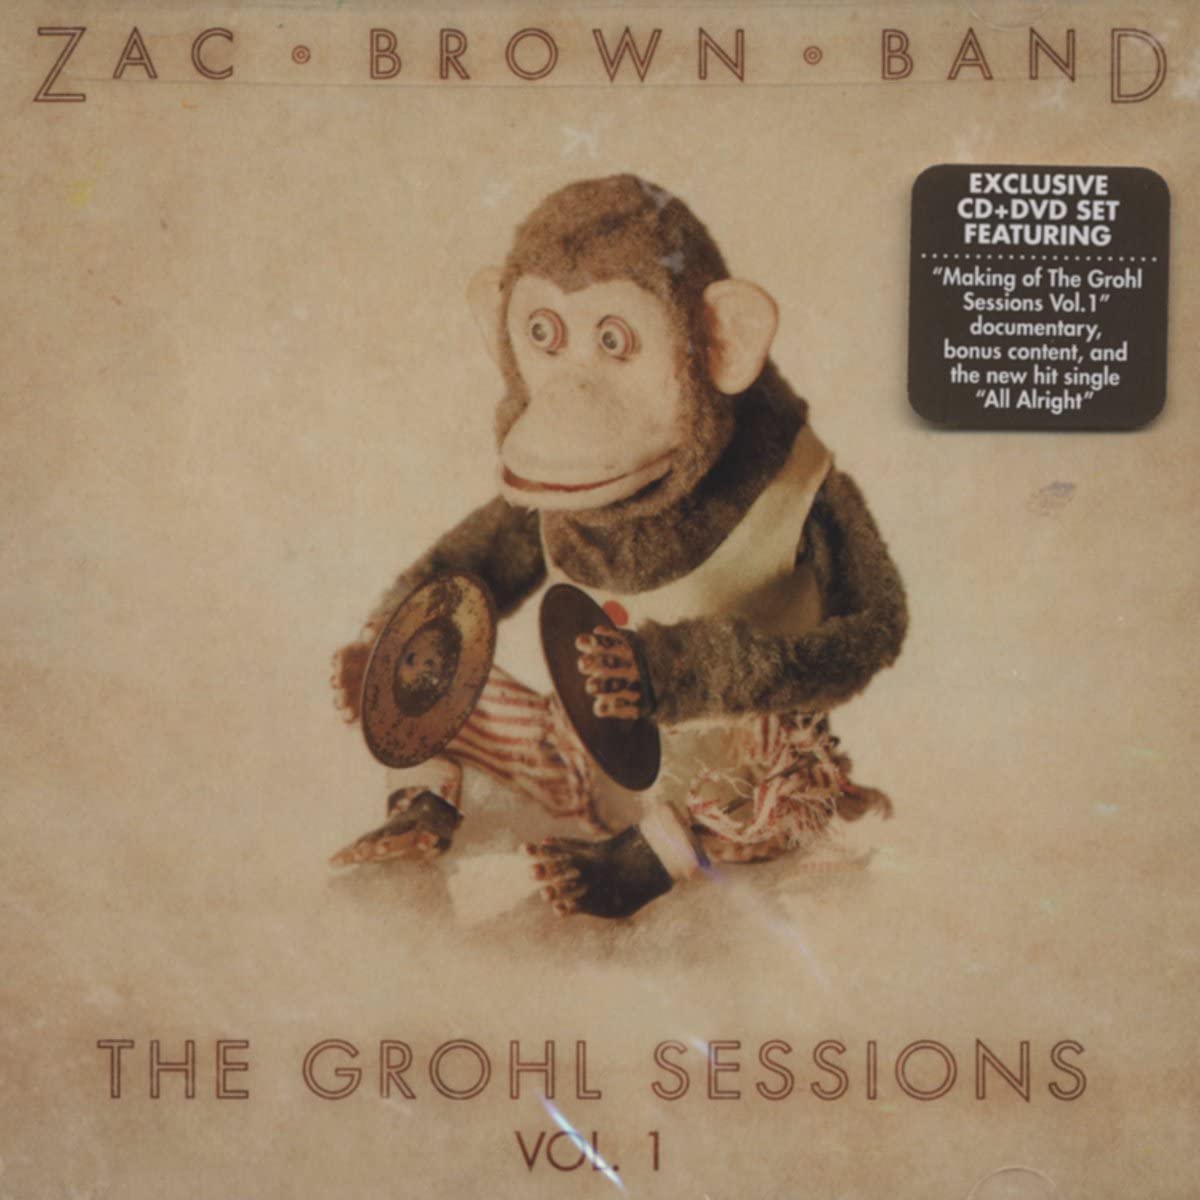 Zac Brown Band - The Grohl Sessions Volume 1 - CD/DVD